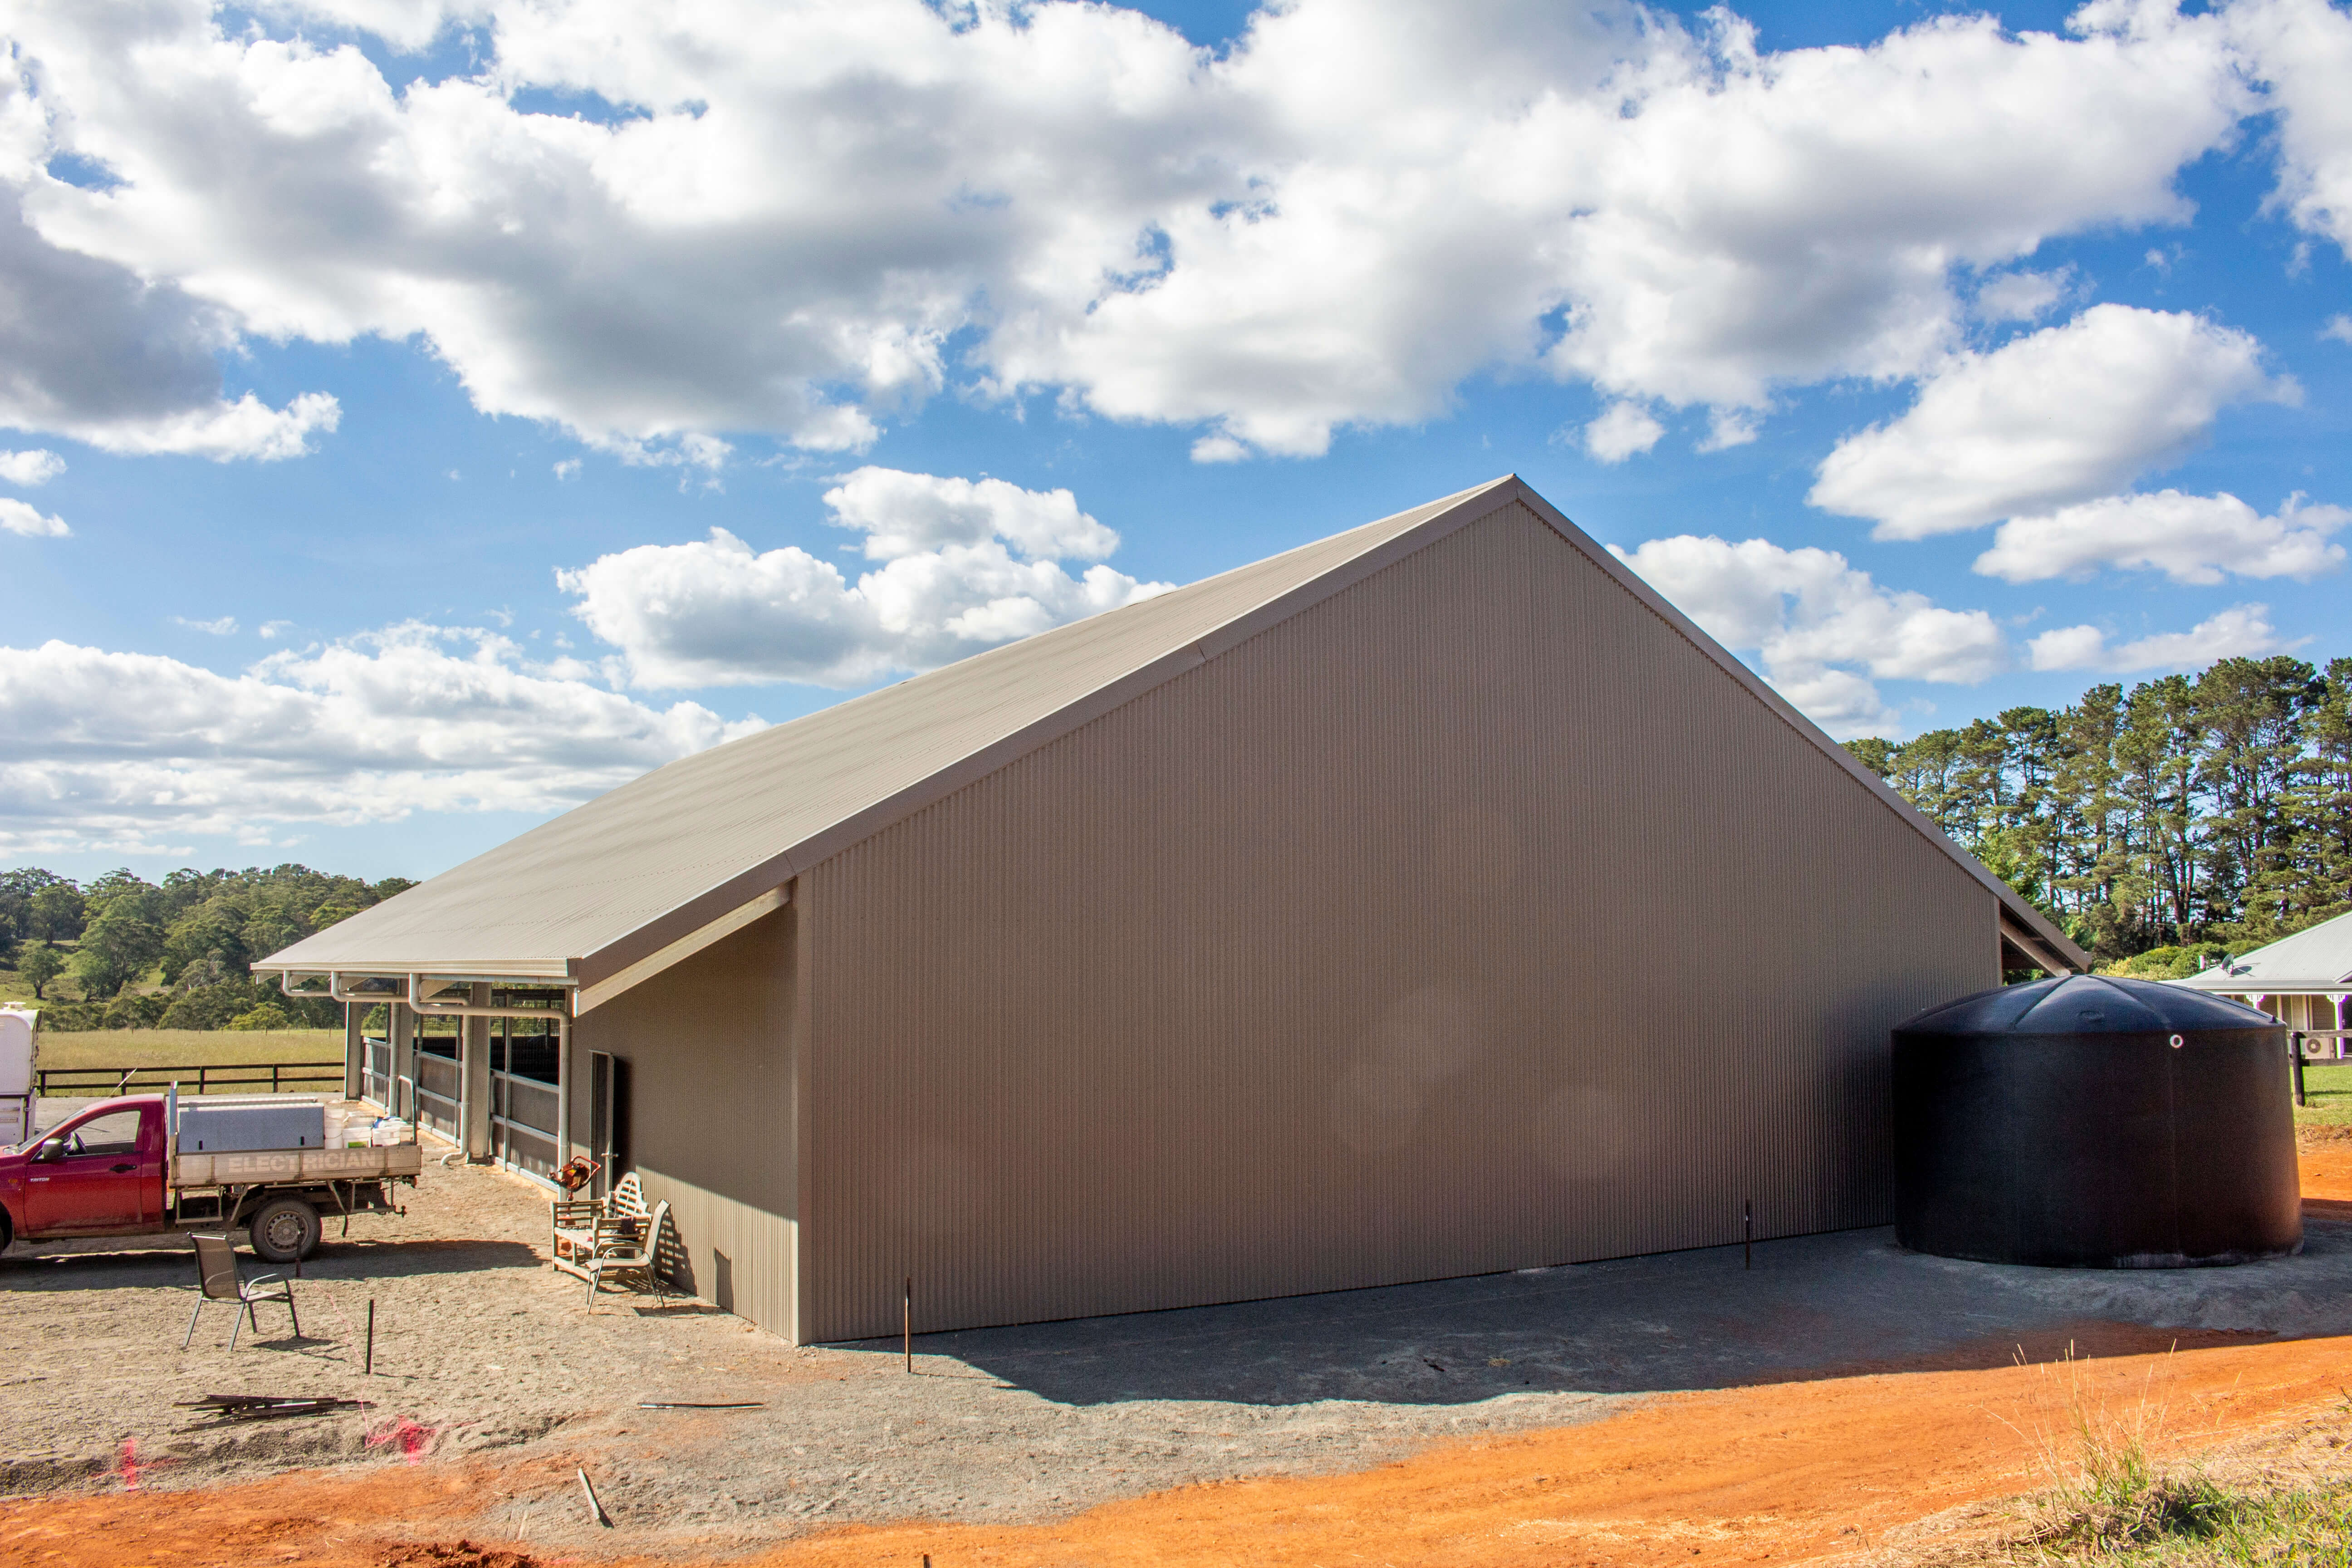 Covered horse stables in Brayton NSW